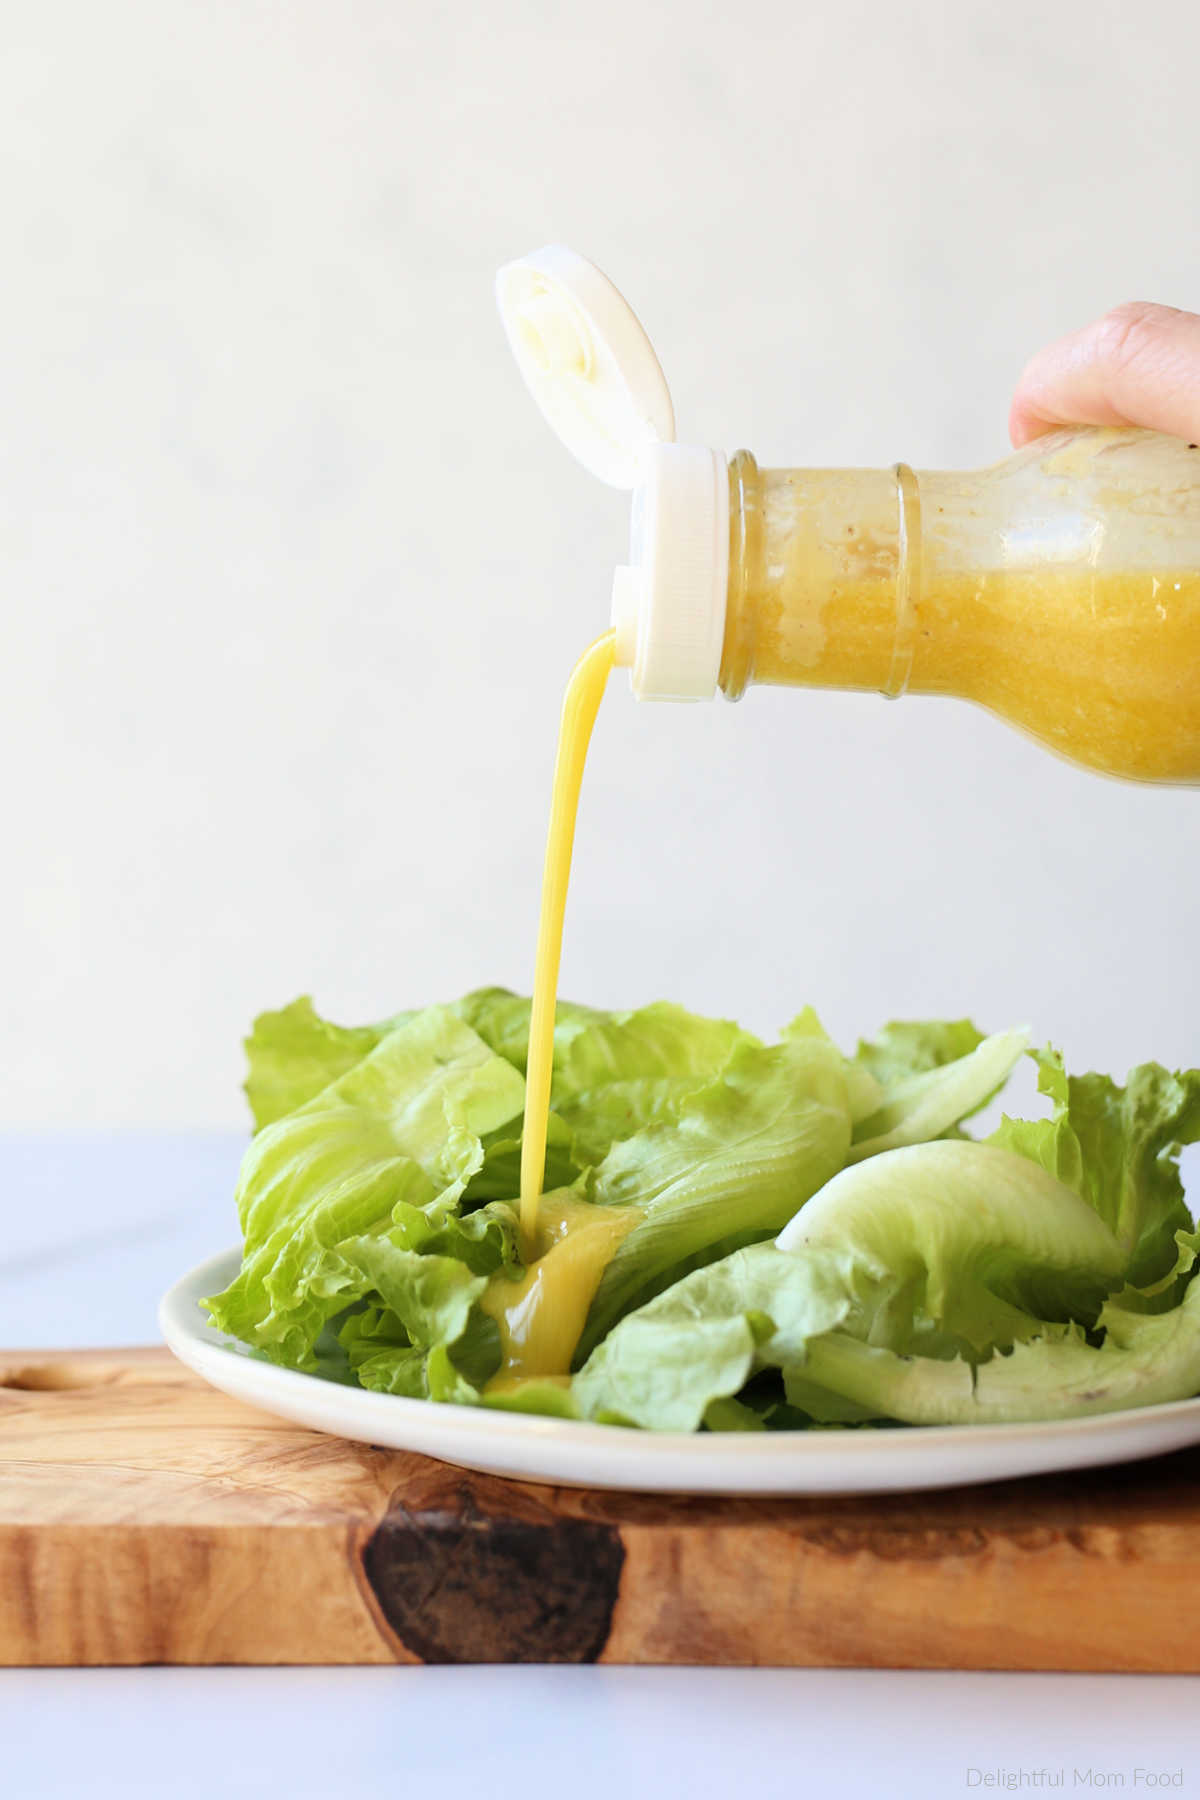 pouring dressing on a salad